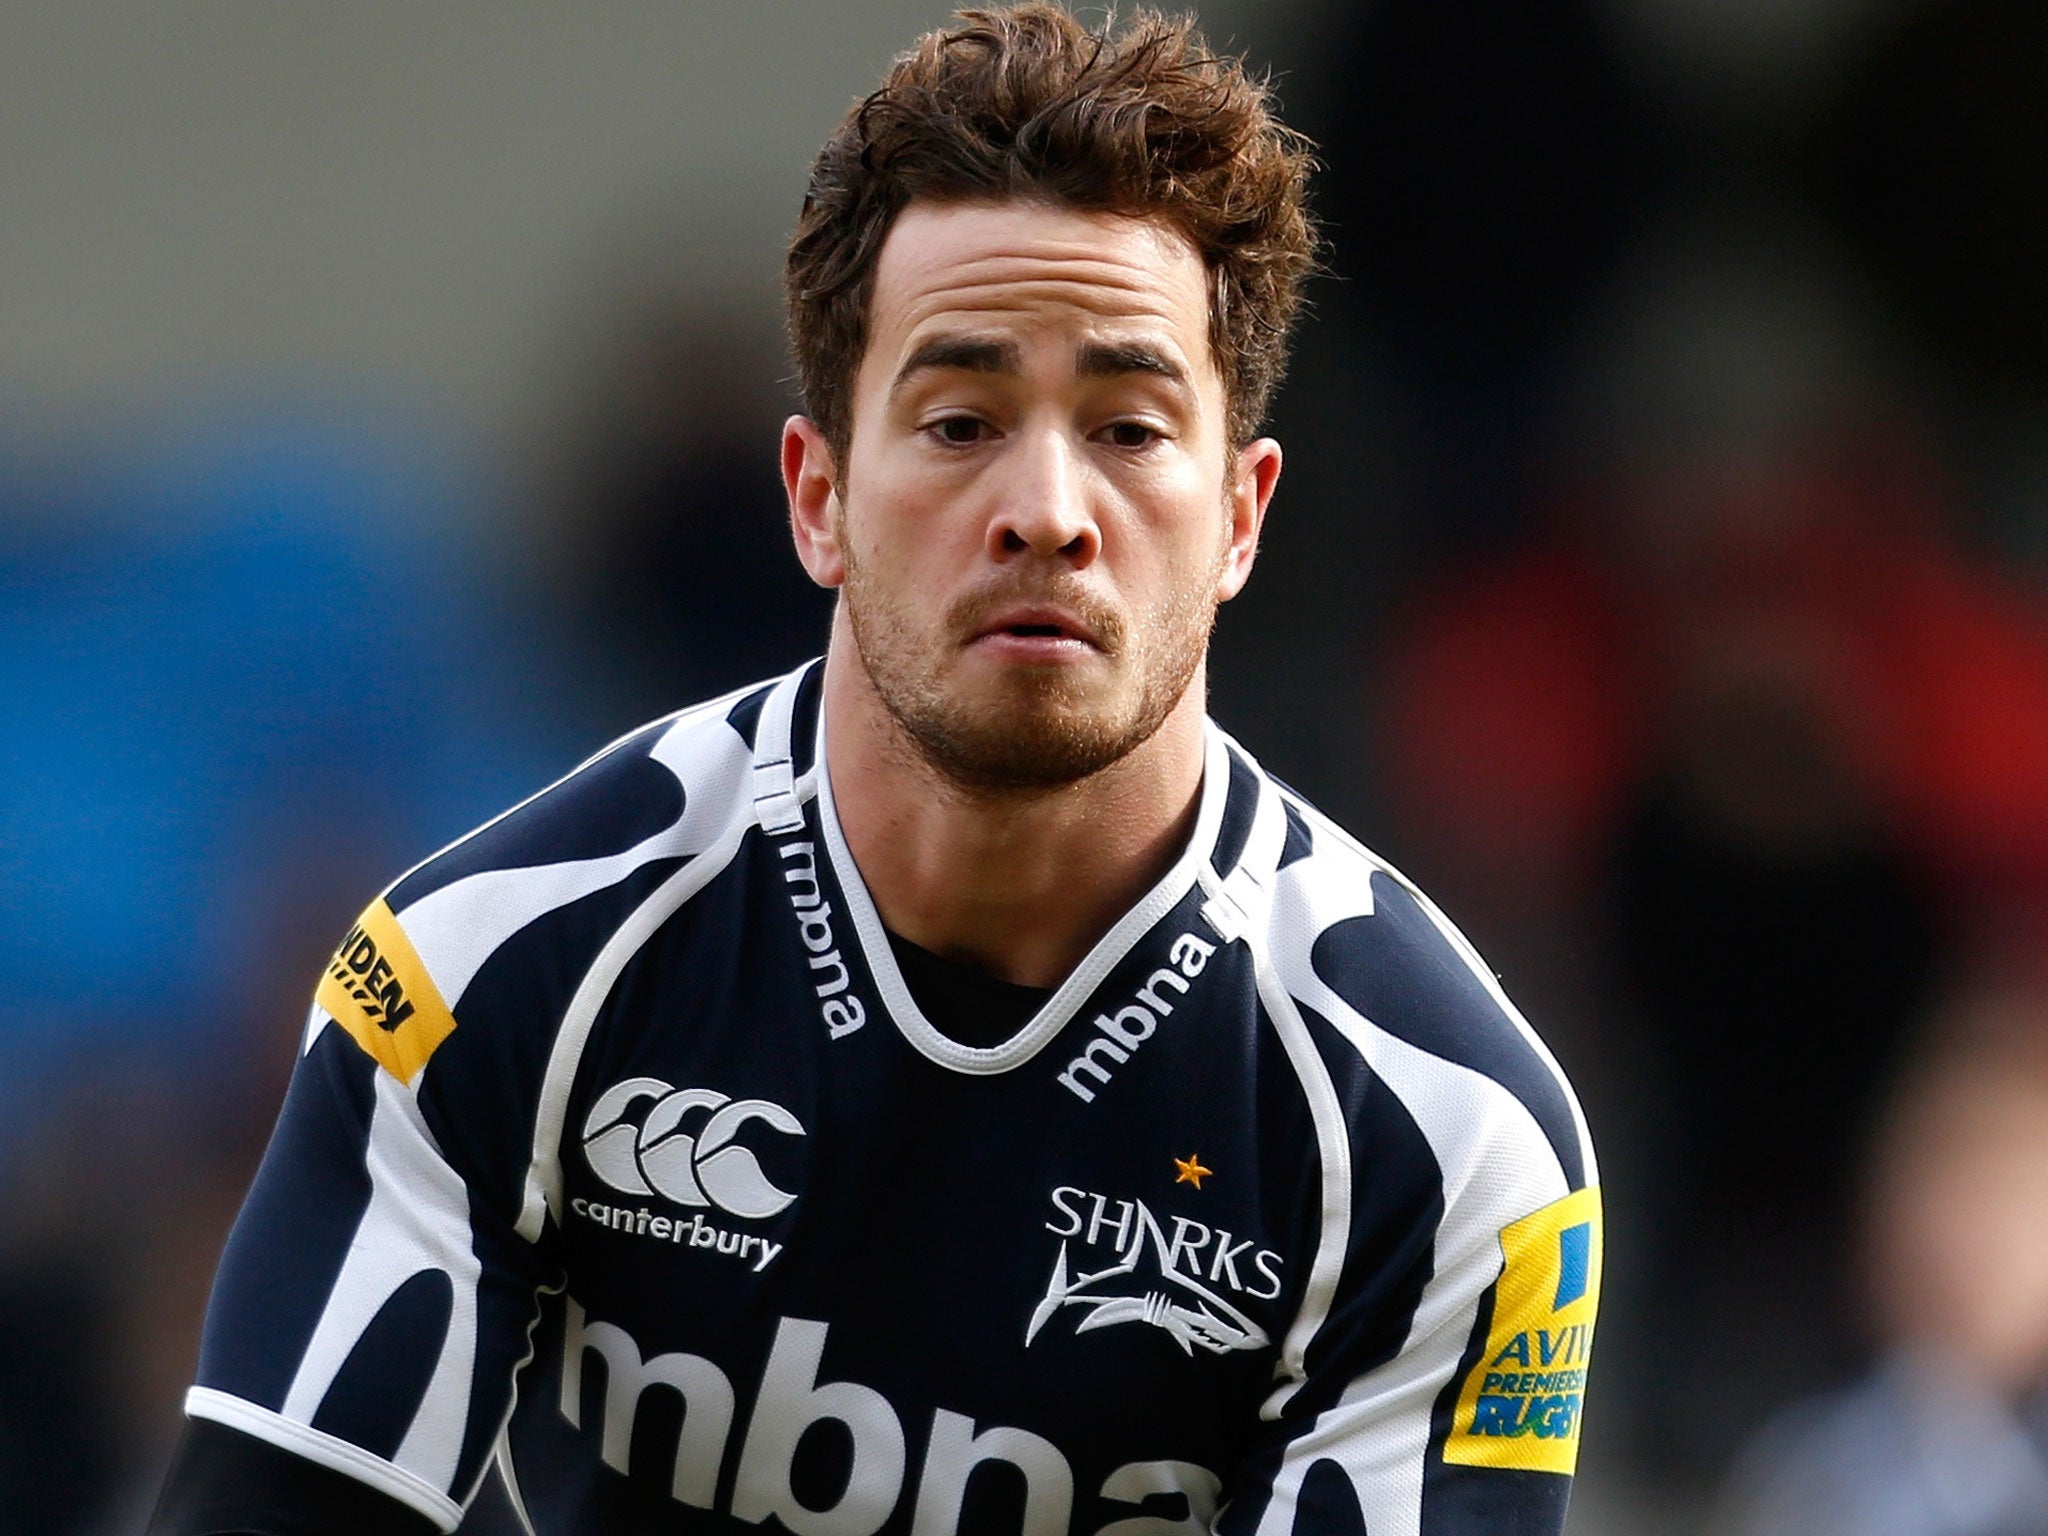 Danny Cipriani was omitted for Sale’s first two games this season